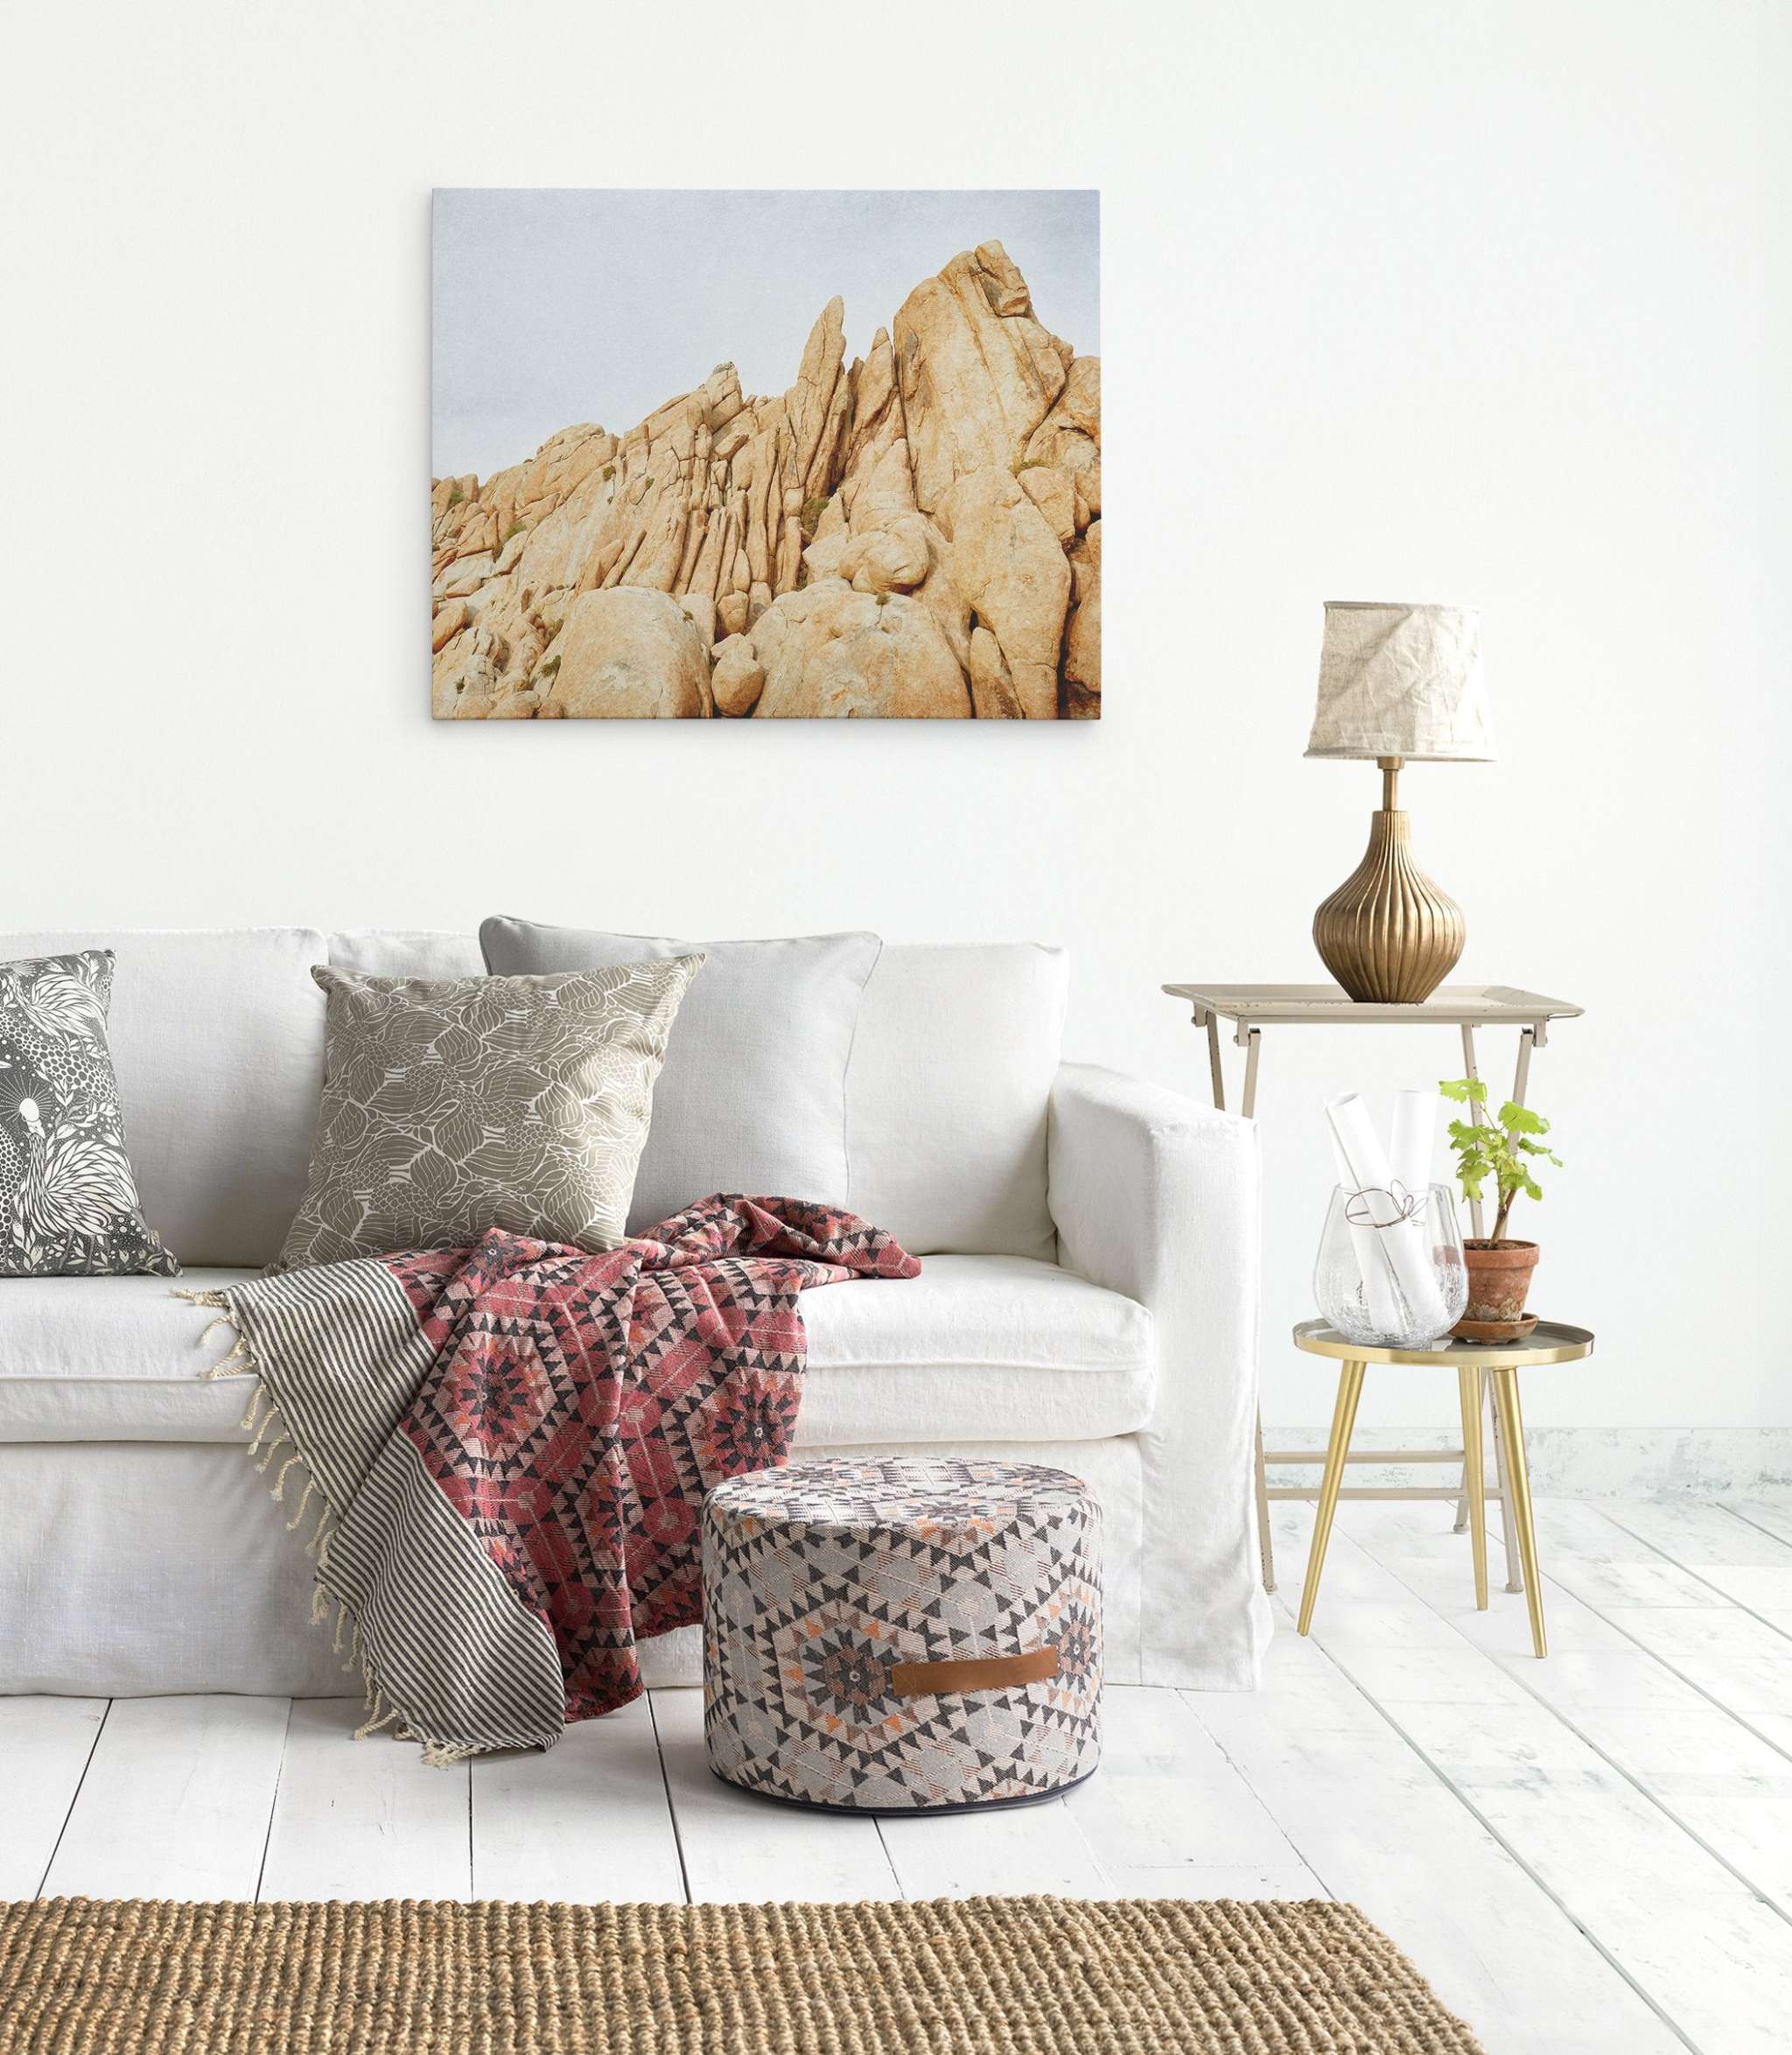 A modern living room with a white sofa adorned with various patterned cushions and a red geometric throw. A round patterned pouf is in front of the sofa. The wall showcases Offley Green's Joshua Tree Canvas Wall Art, 'Joshua Rocks,' depicting yellow desert rock formations. A small side table with a lamp, plant, and glass bottle completes the scene.